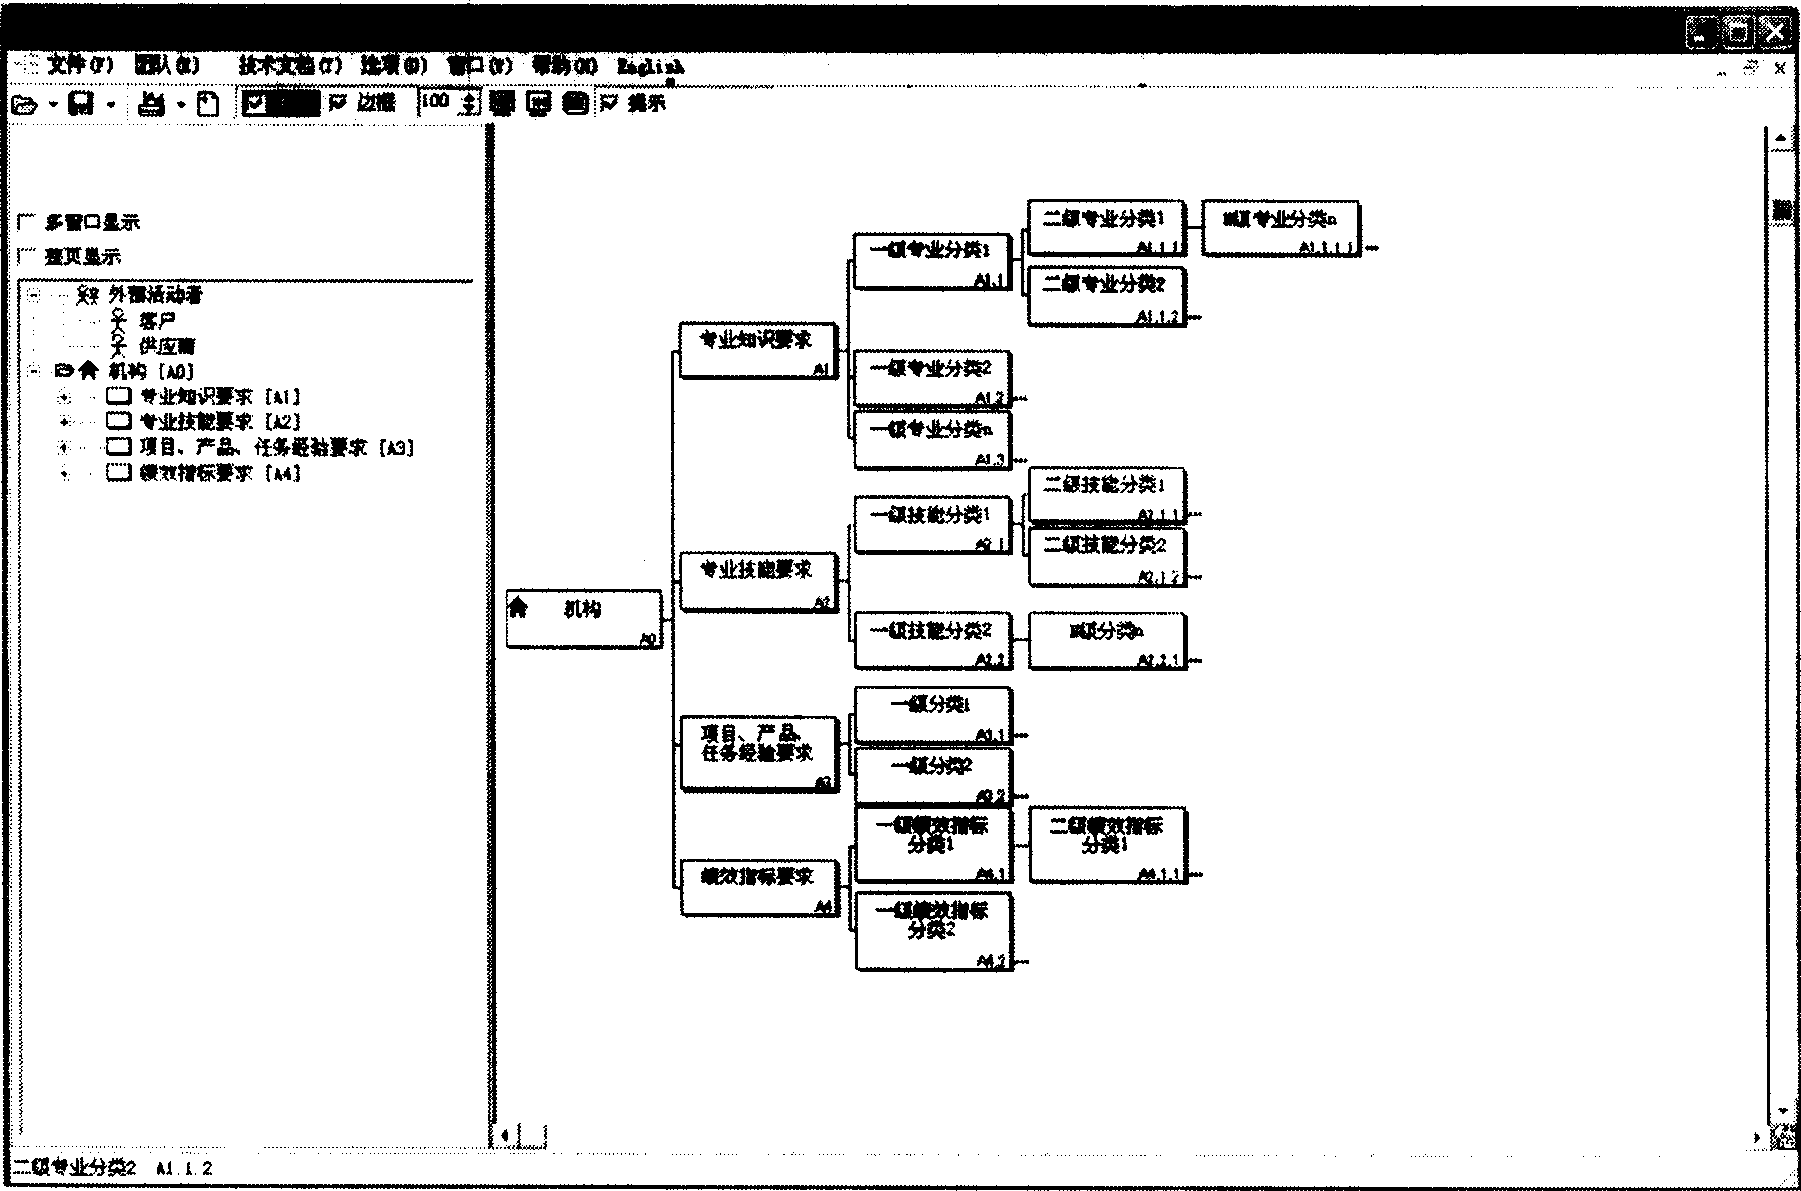 Post model construction system and method based on GB/T19487